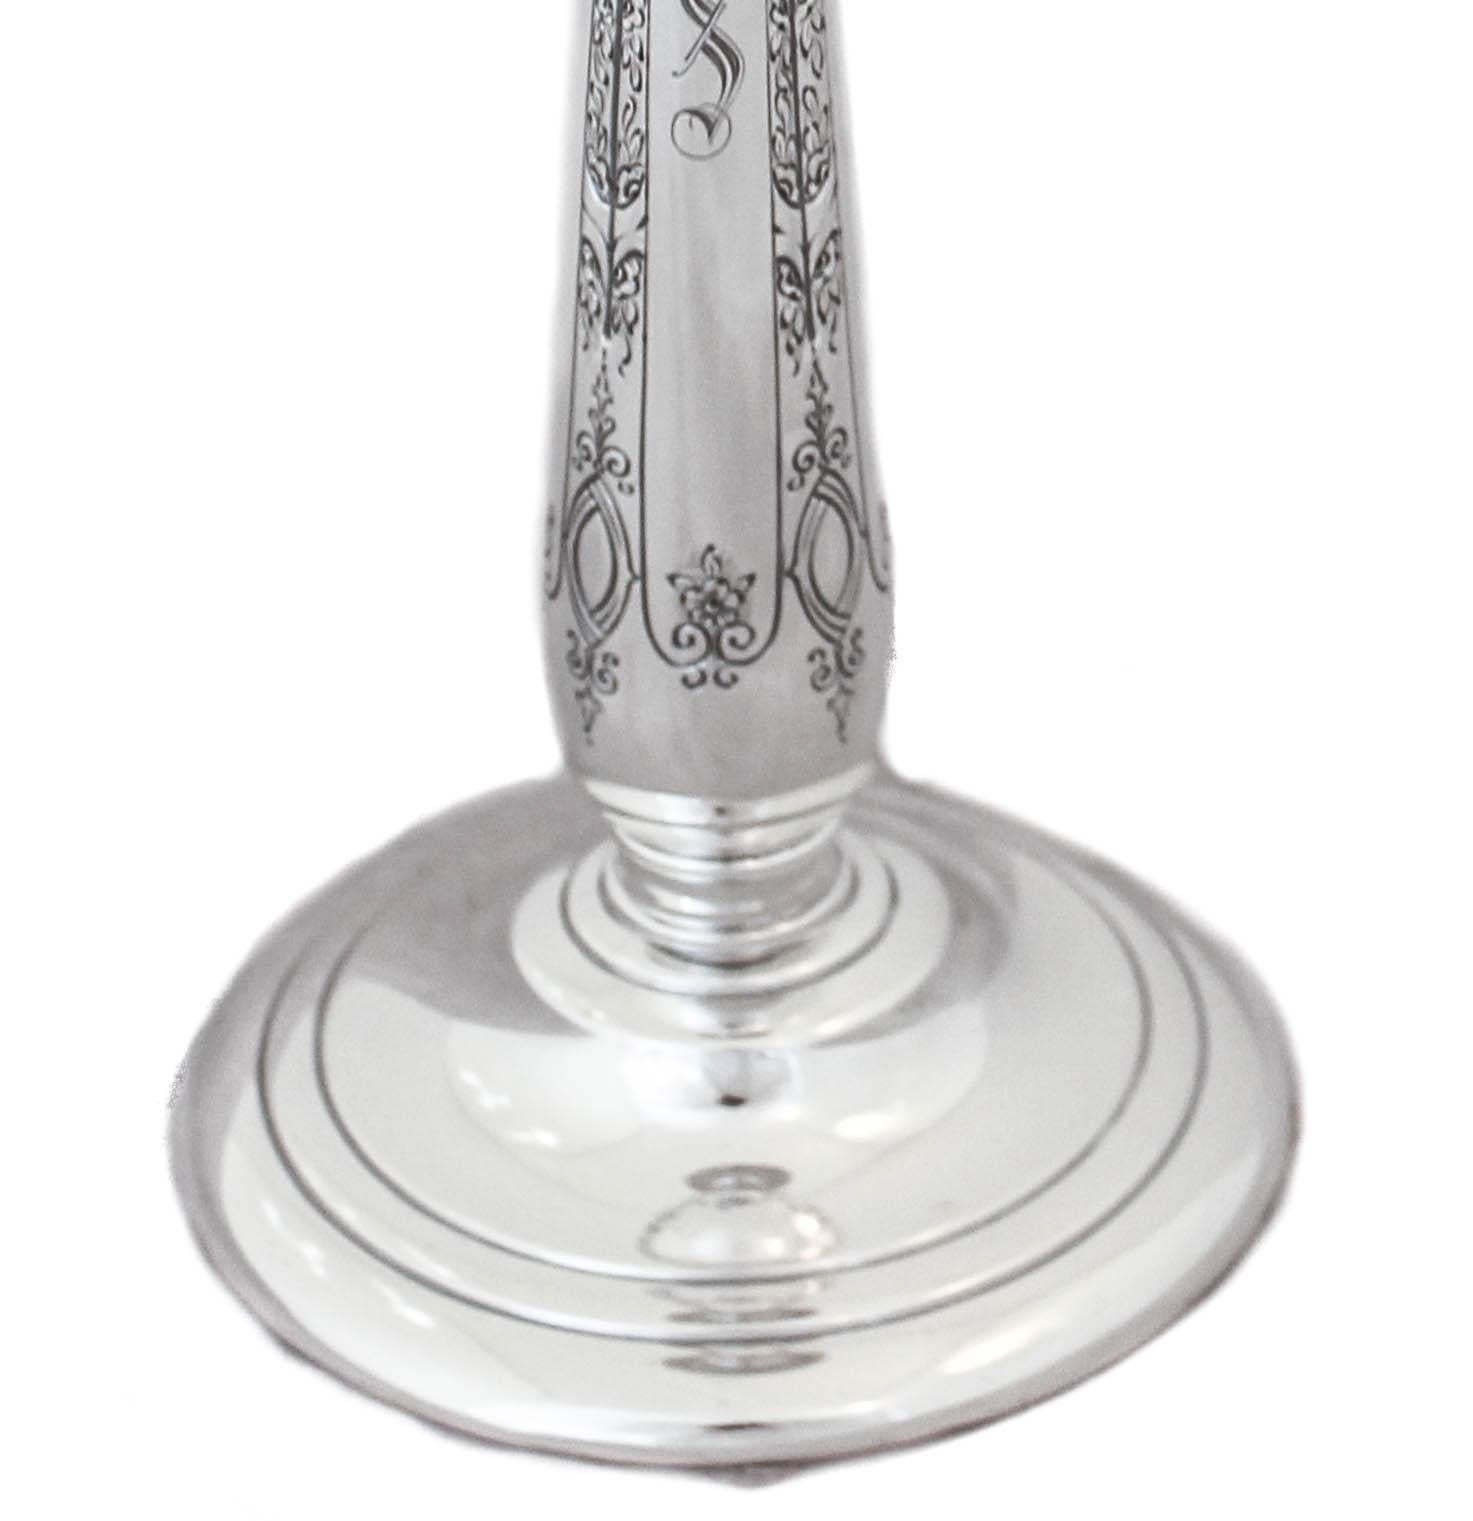 Early 20th Century Sterling Silver “Lady Diana” Candlesticks